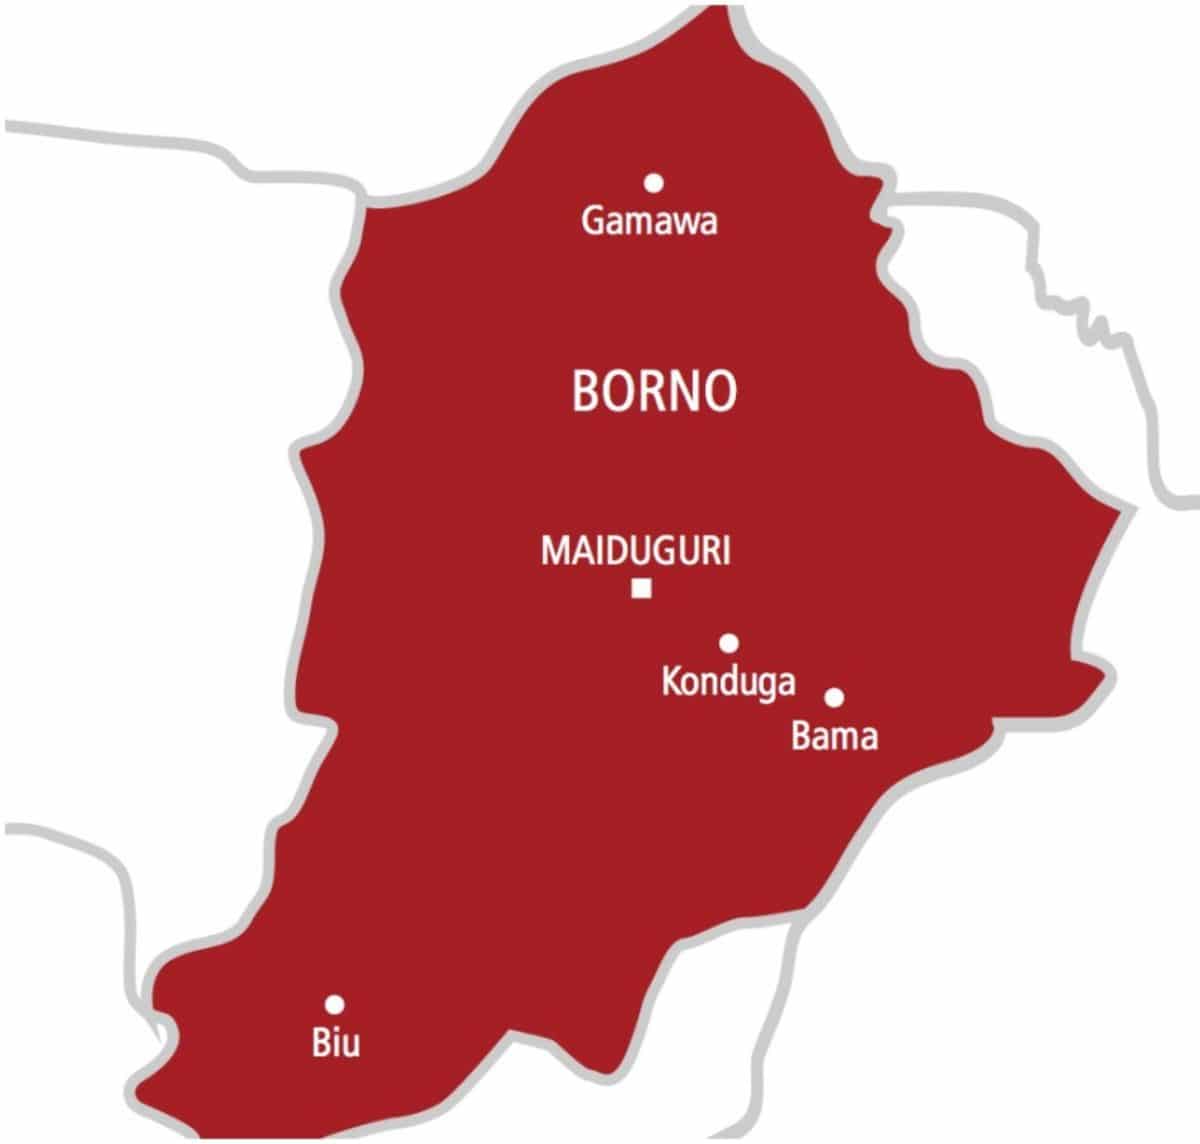 Post Insurgency: Rights group urges Borno govt to consider transitional Justice for Peace